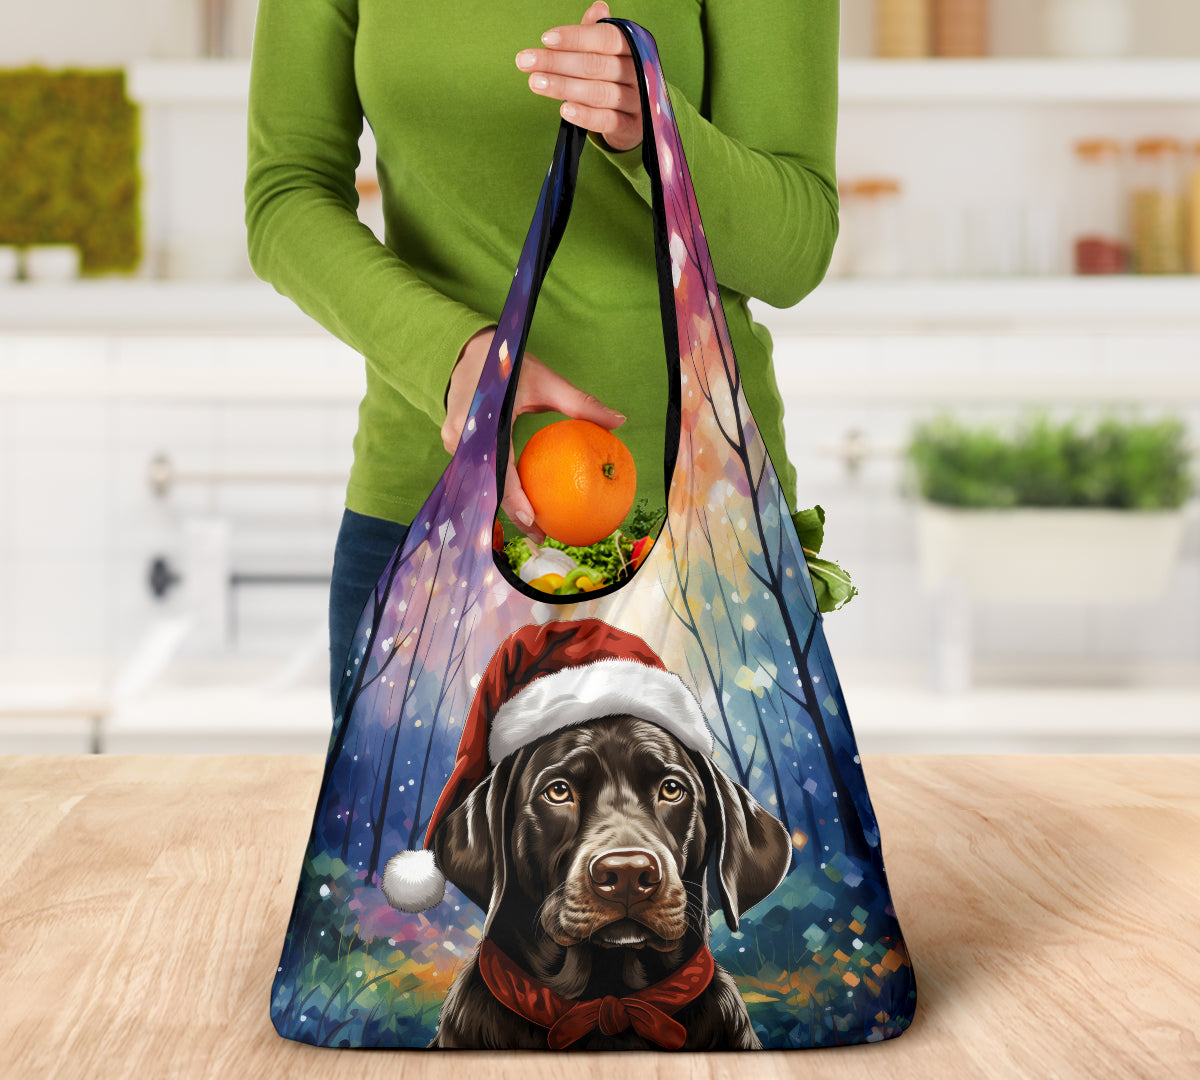 German Shorthaired Pointer Design 3 Pack Grocery Bags - 2023 Holiday - Christmas Print